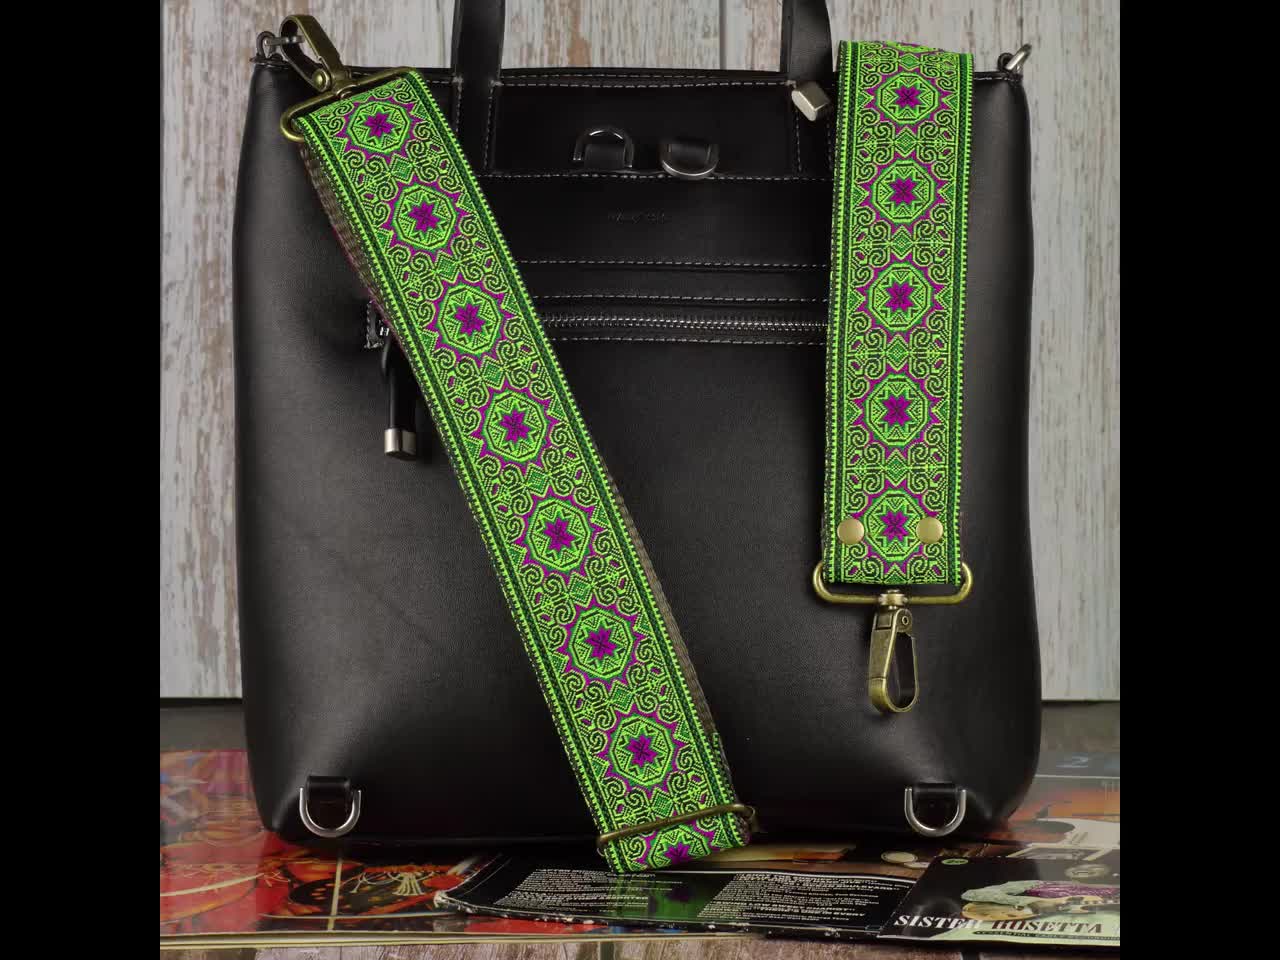 Retro Floral Woven Crossbody Purse Strap, Embroidered Canvas Purse Strap, Christmas Gift